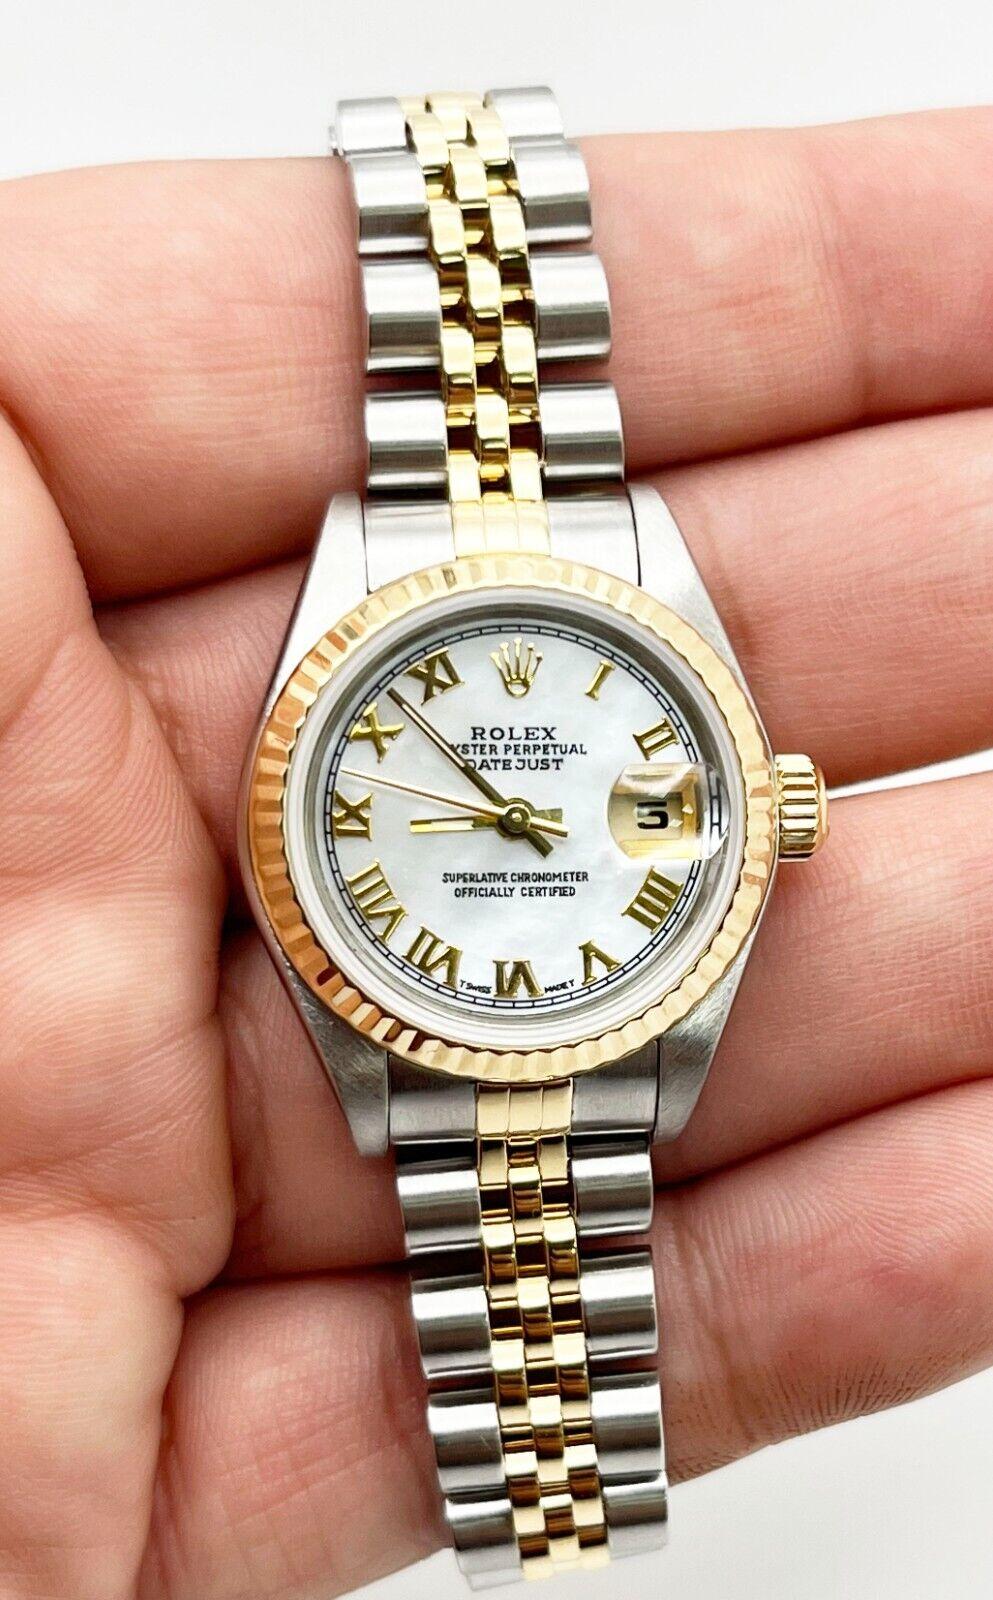 Style Number: 79173

Serial: Y947***

Year: 2002
 
Model: Ladies Datejust 
 
Case Material: Stainless Steel 
 
Band: 18K Yellow Gold & Stainless Steel 
 
Bezel: 18K Yellow Gold 
 
Dial: Refinished White Mother of Pearl Roman Numeral Dial 
 
Face: